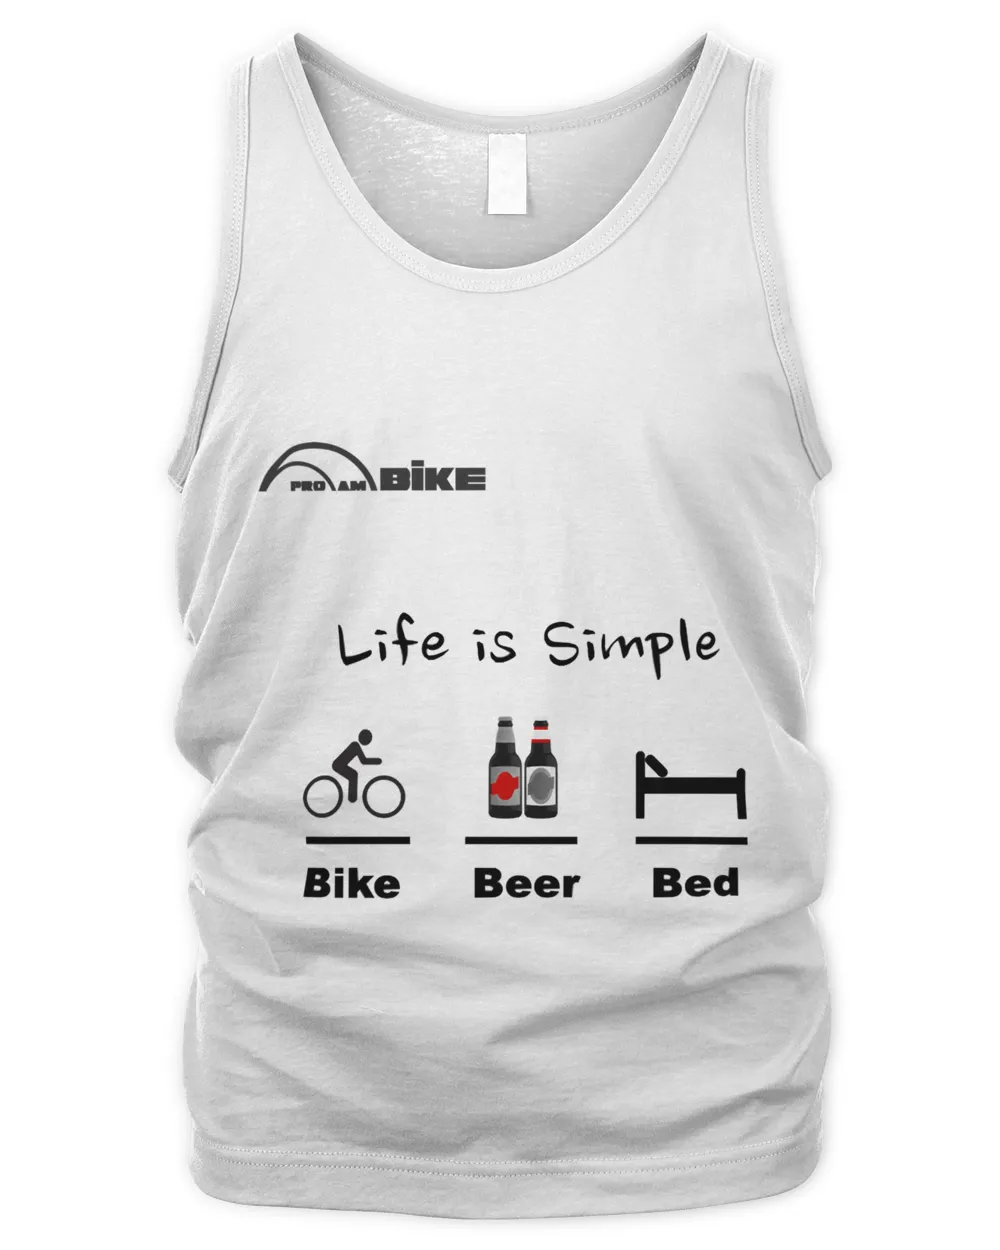 Cycling T Shirt - Life is Simple - Bike - Beer - Bed Classic T-Shirt